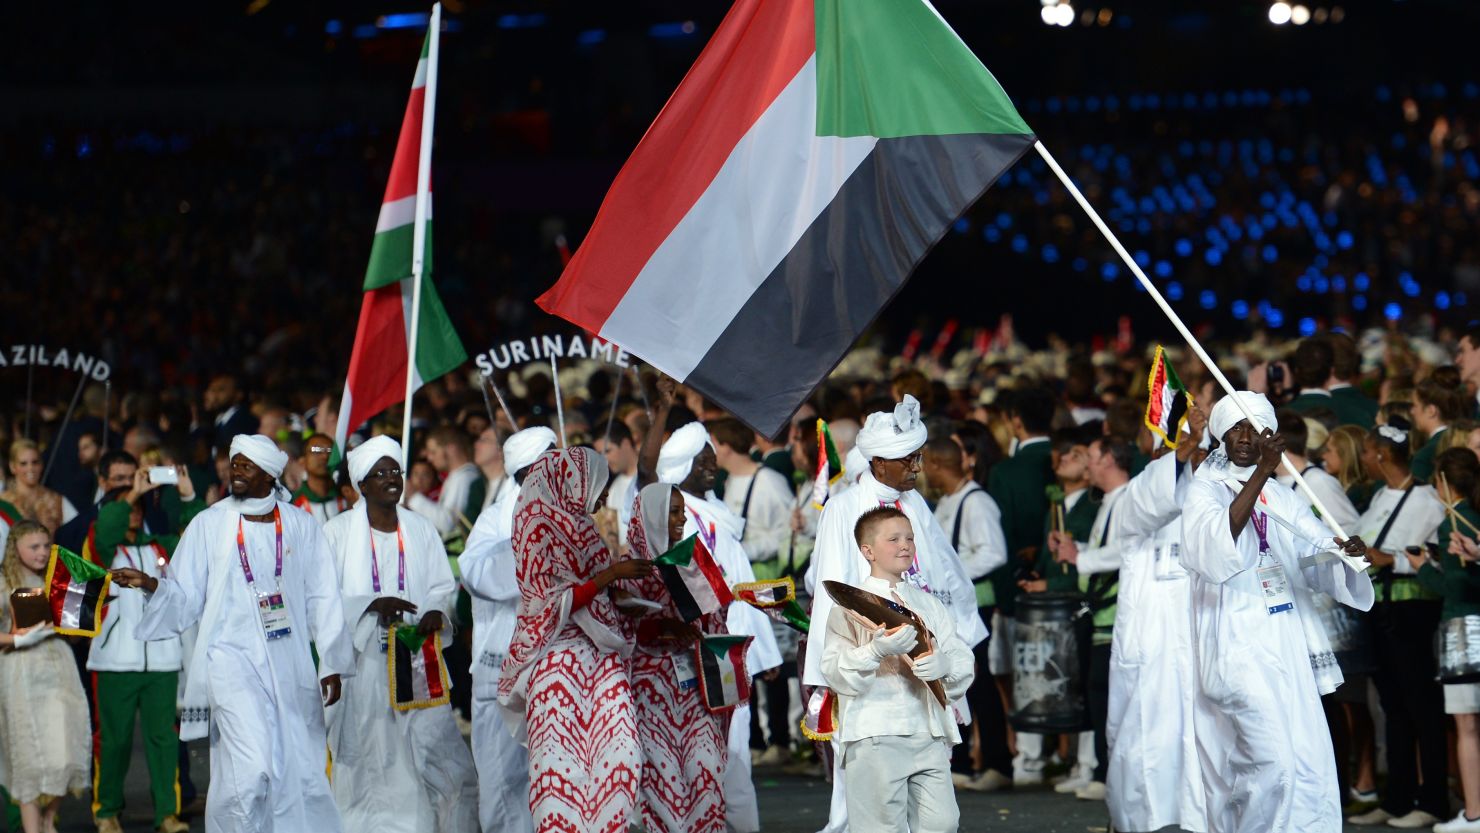 Sudan's team parades. Frida Ghitis says coverage of the Games overlooks fascinating stories of athletes from other nations.
